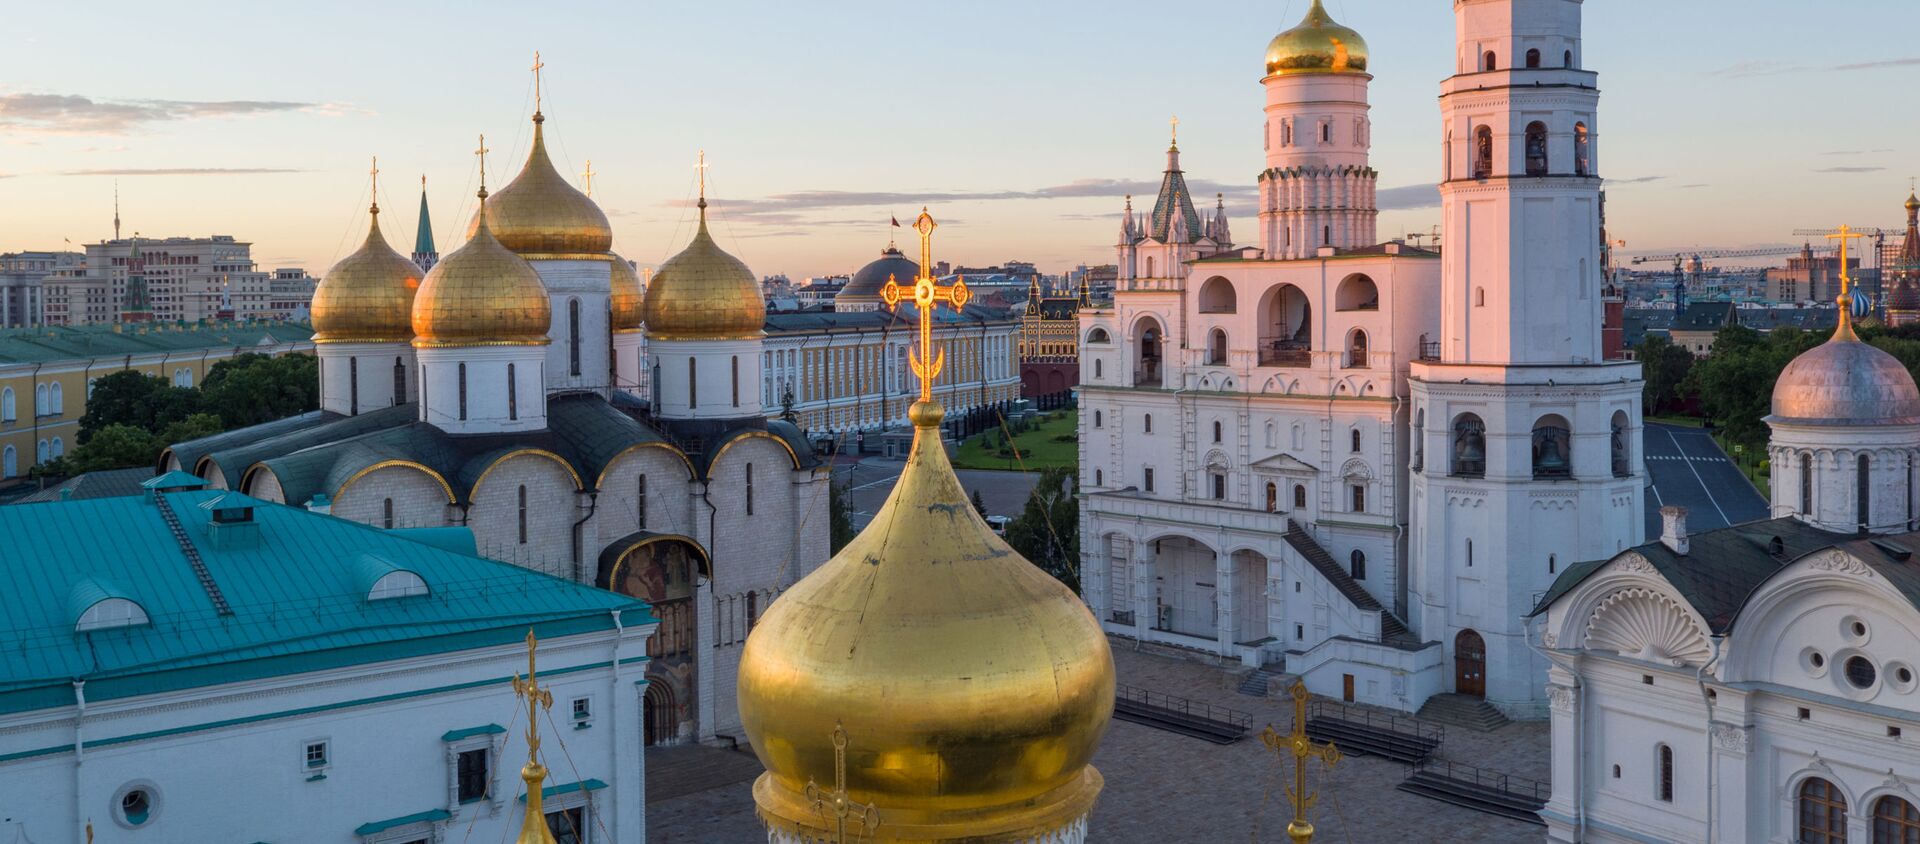 Ivan the Great Bell Tower, the Church of the Twelve Apostles, the Annunciation Cathedral, the Faceted Chamber on the territory of the Moscow Kremlin. - Sputnik International, 1920, 03.09.2021